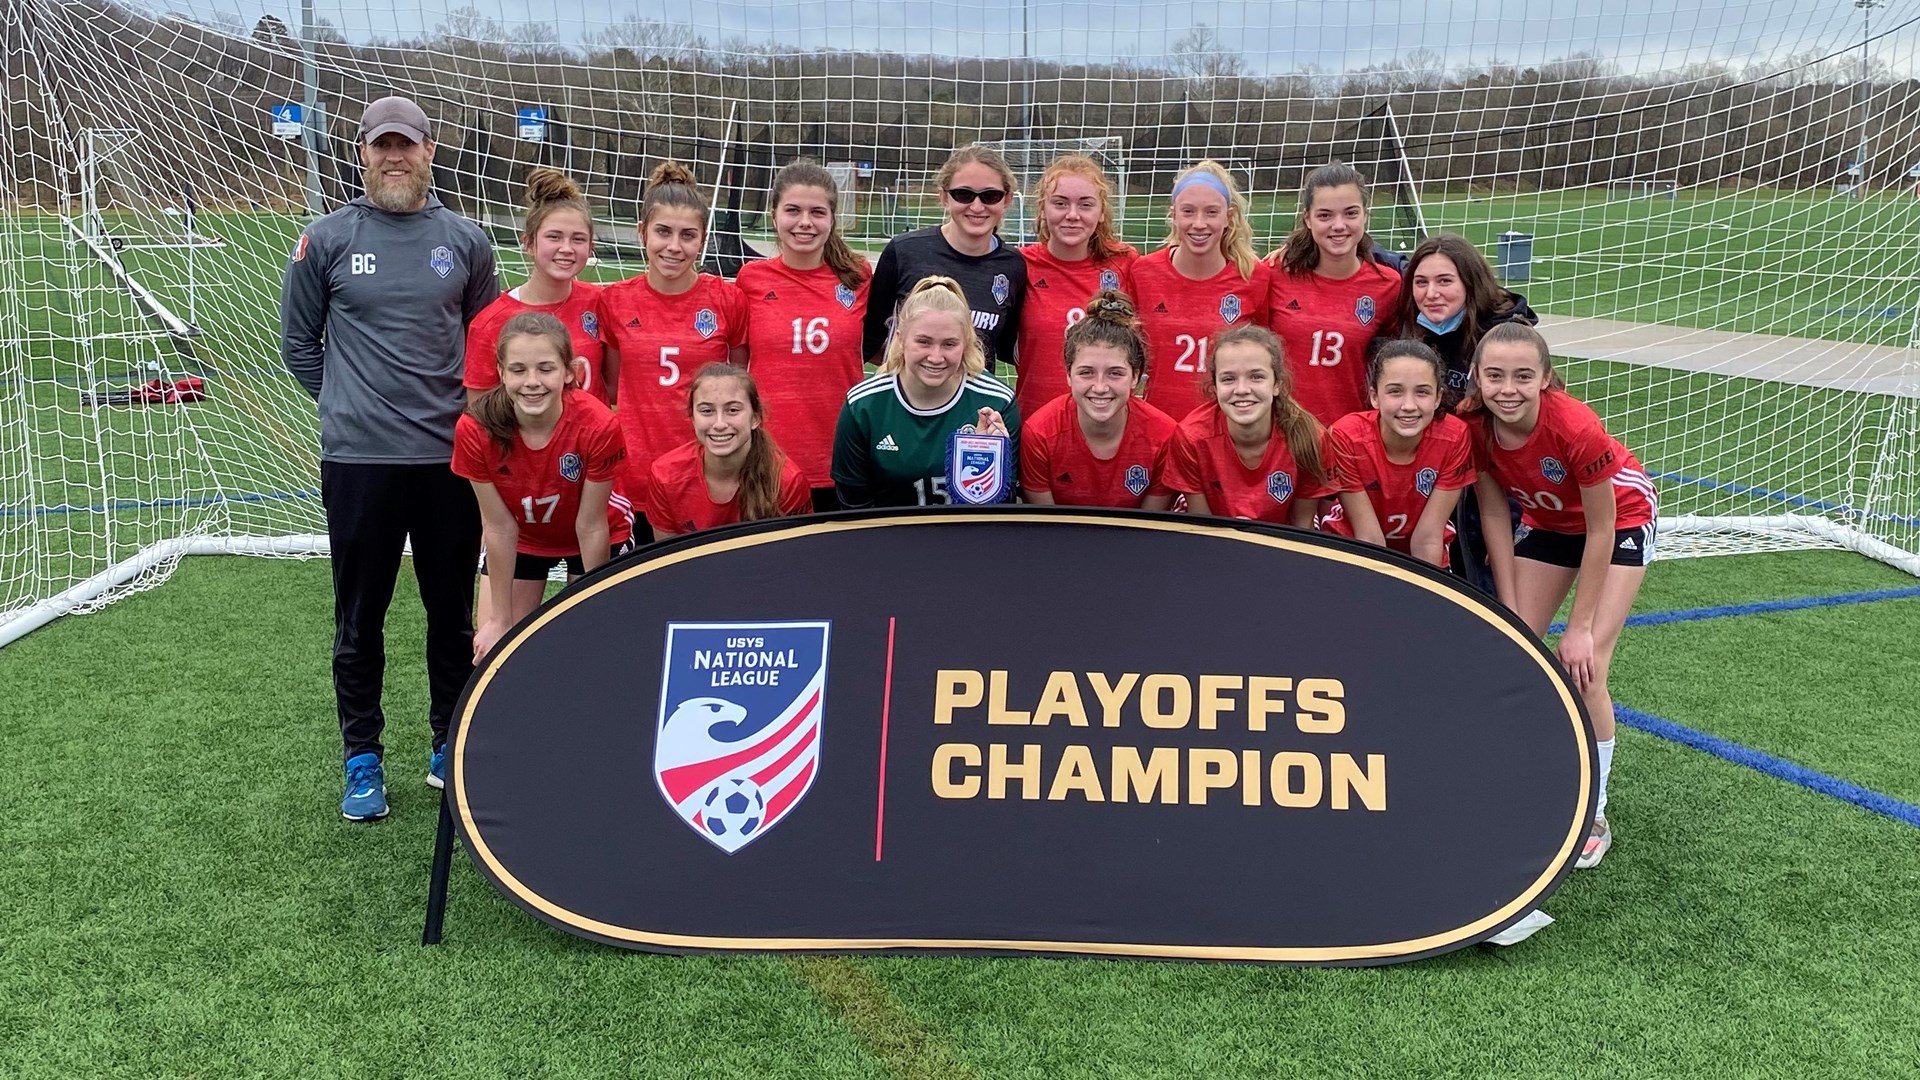 Trio of Great Lakes Conference teams qualify for USYS National